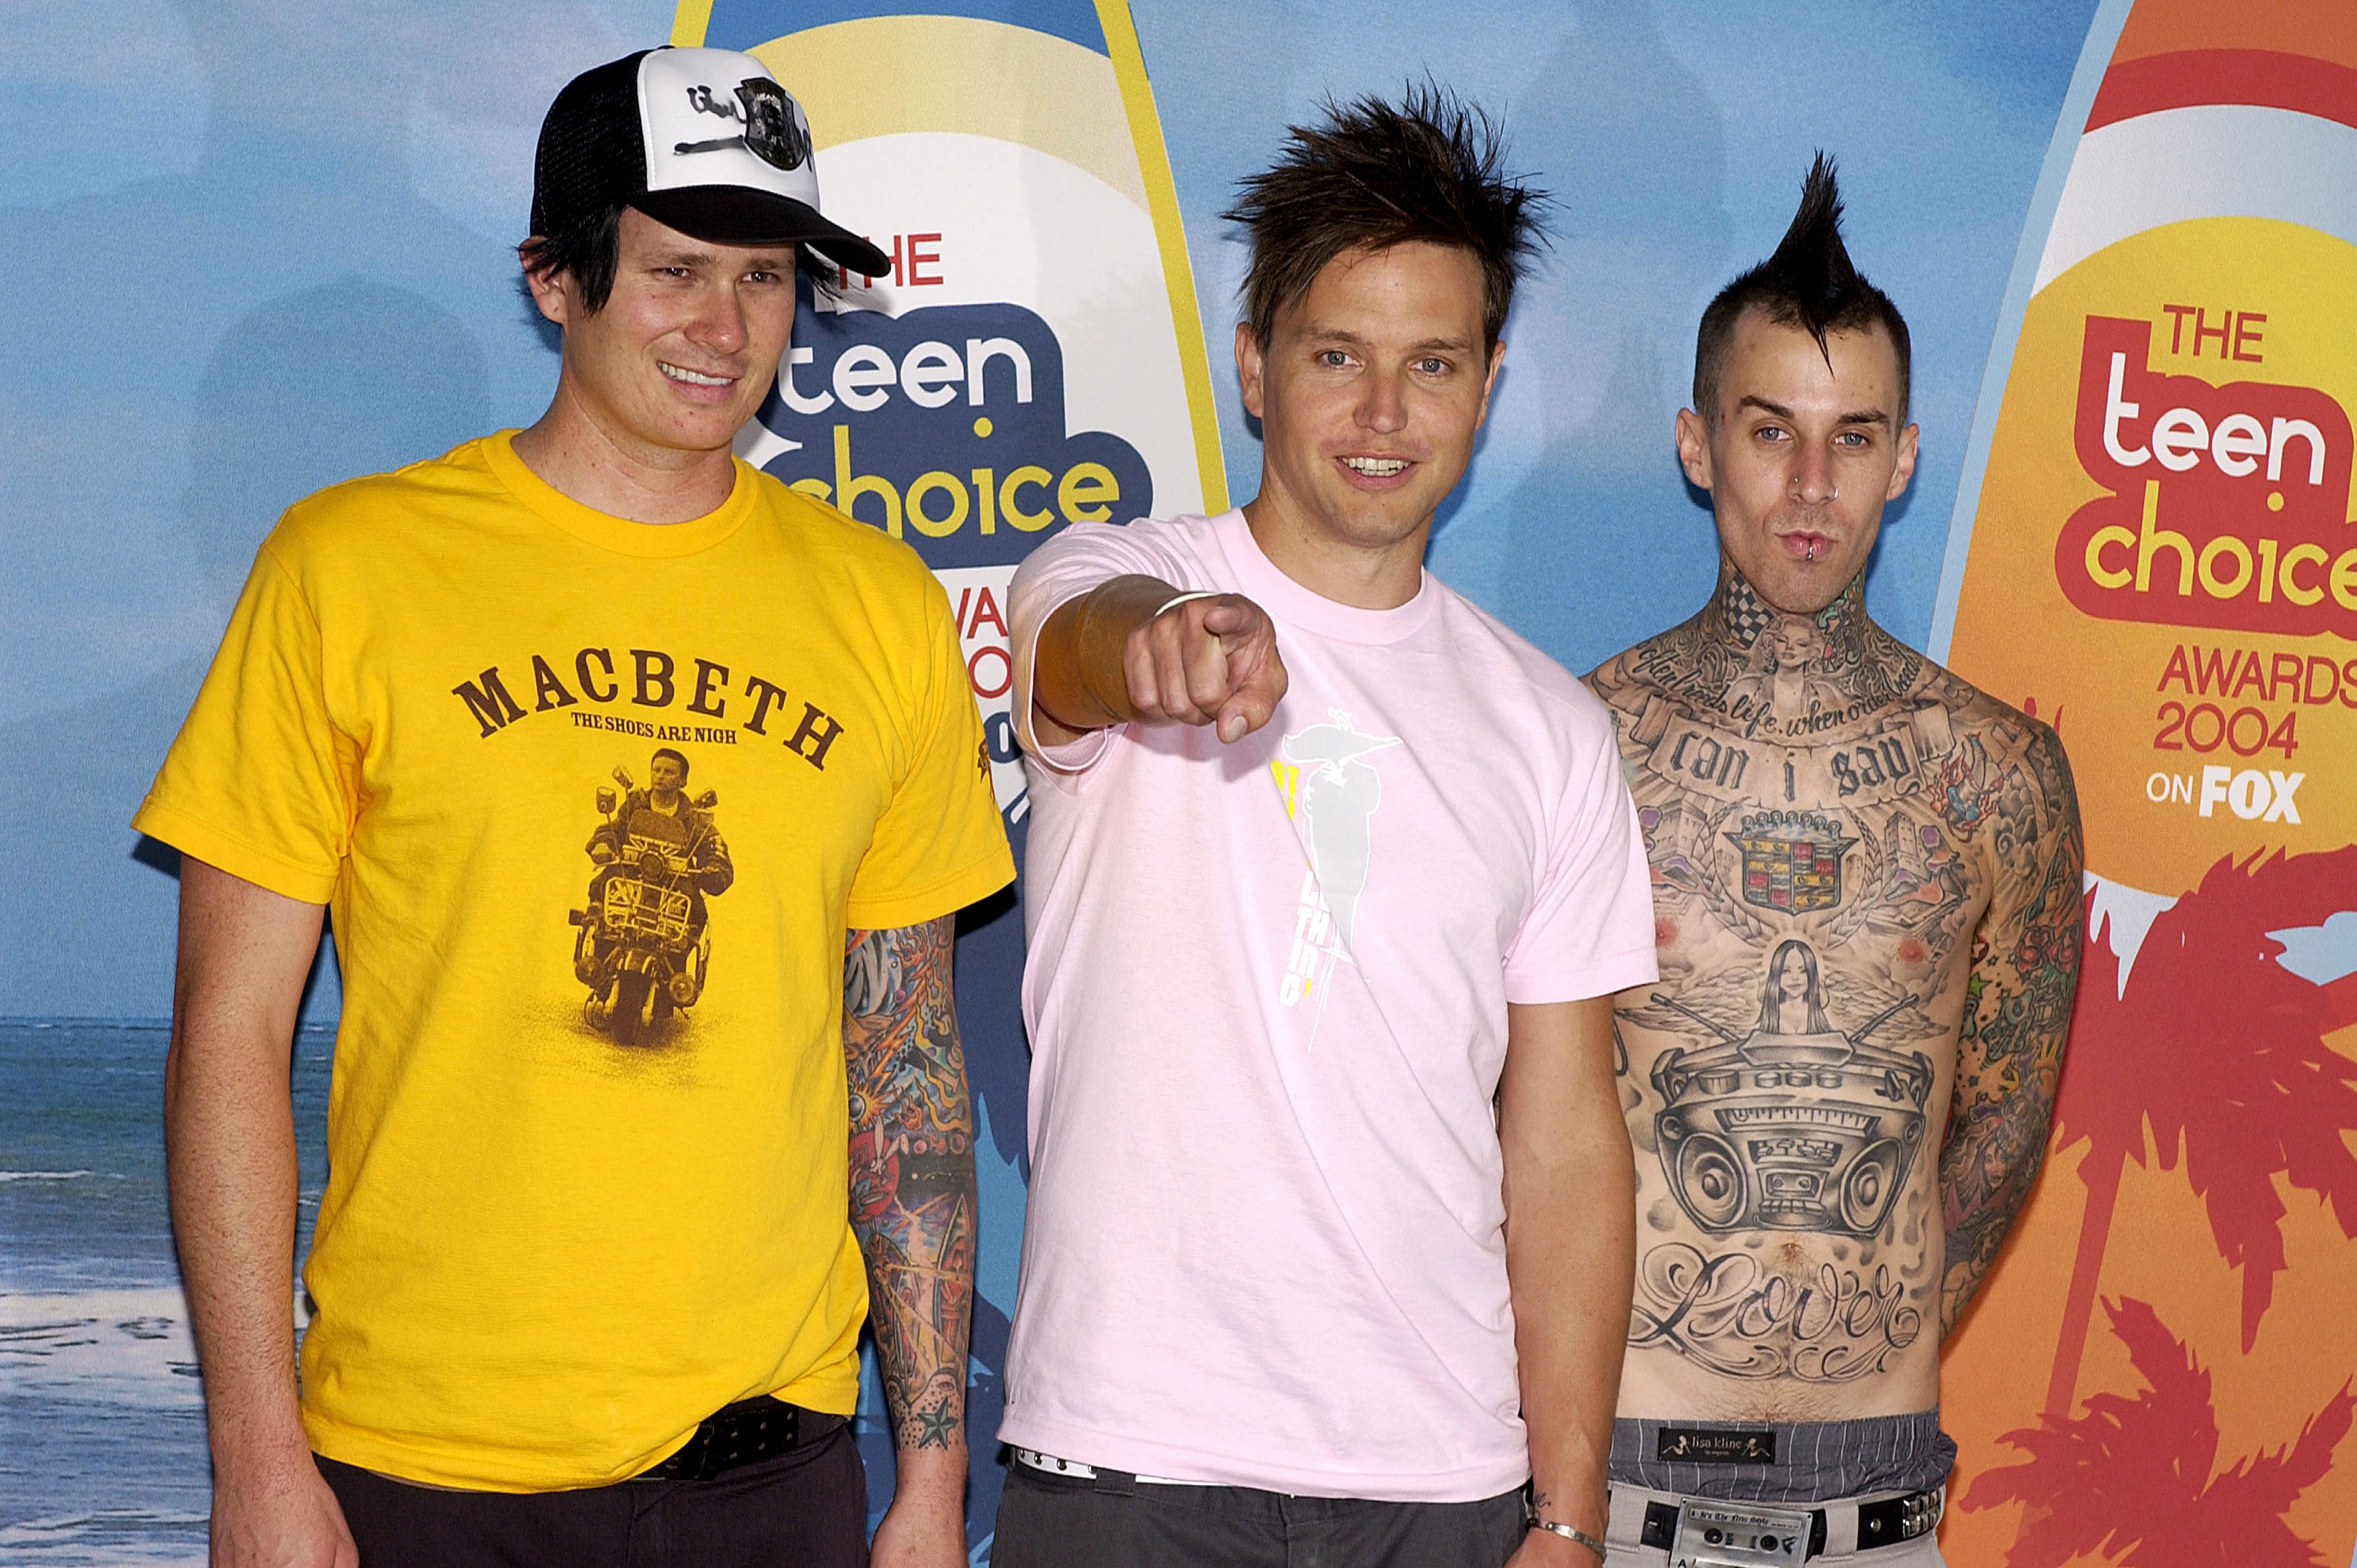 Your Entire 20s Explained by Blink-182 Lyrics - BroBible